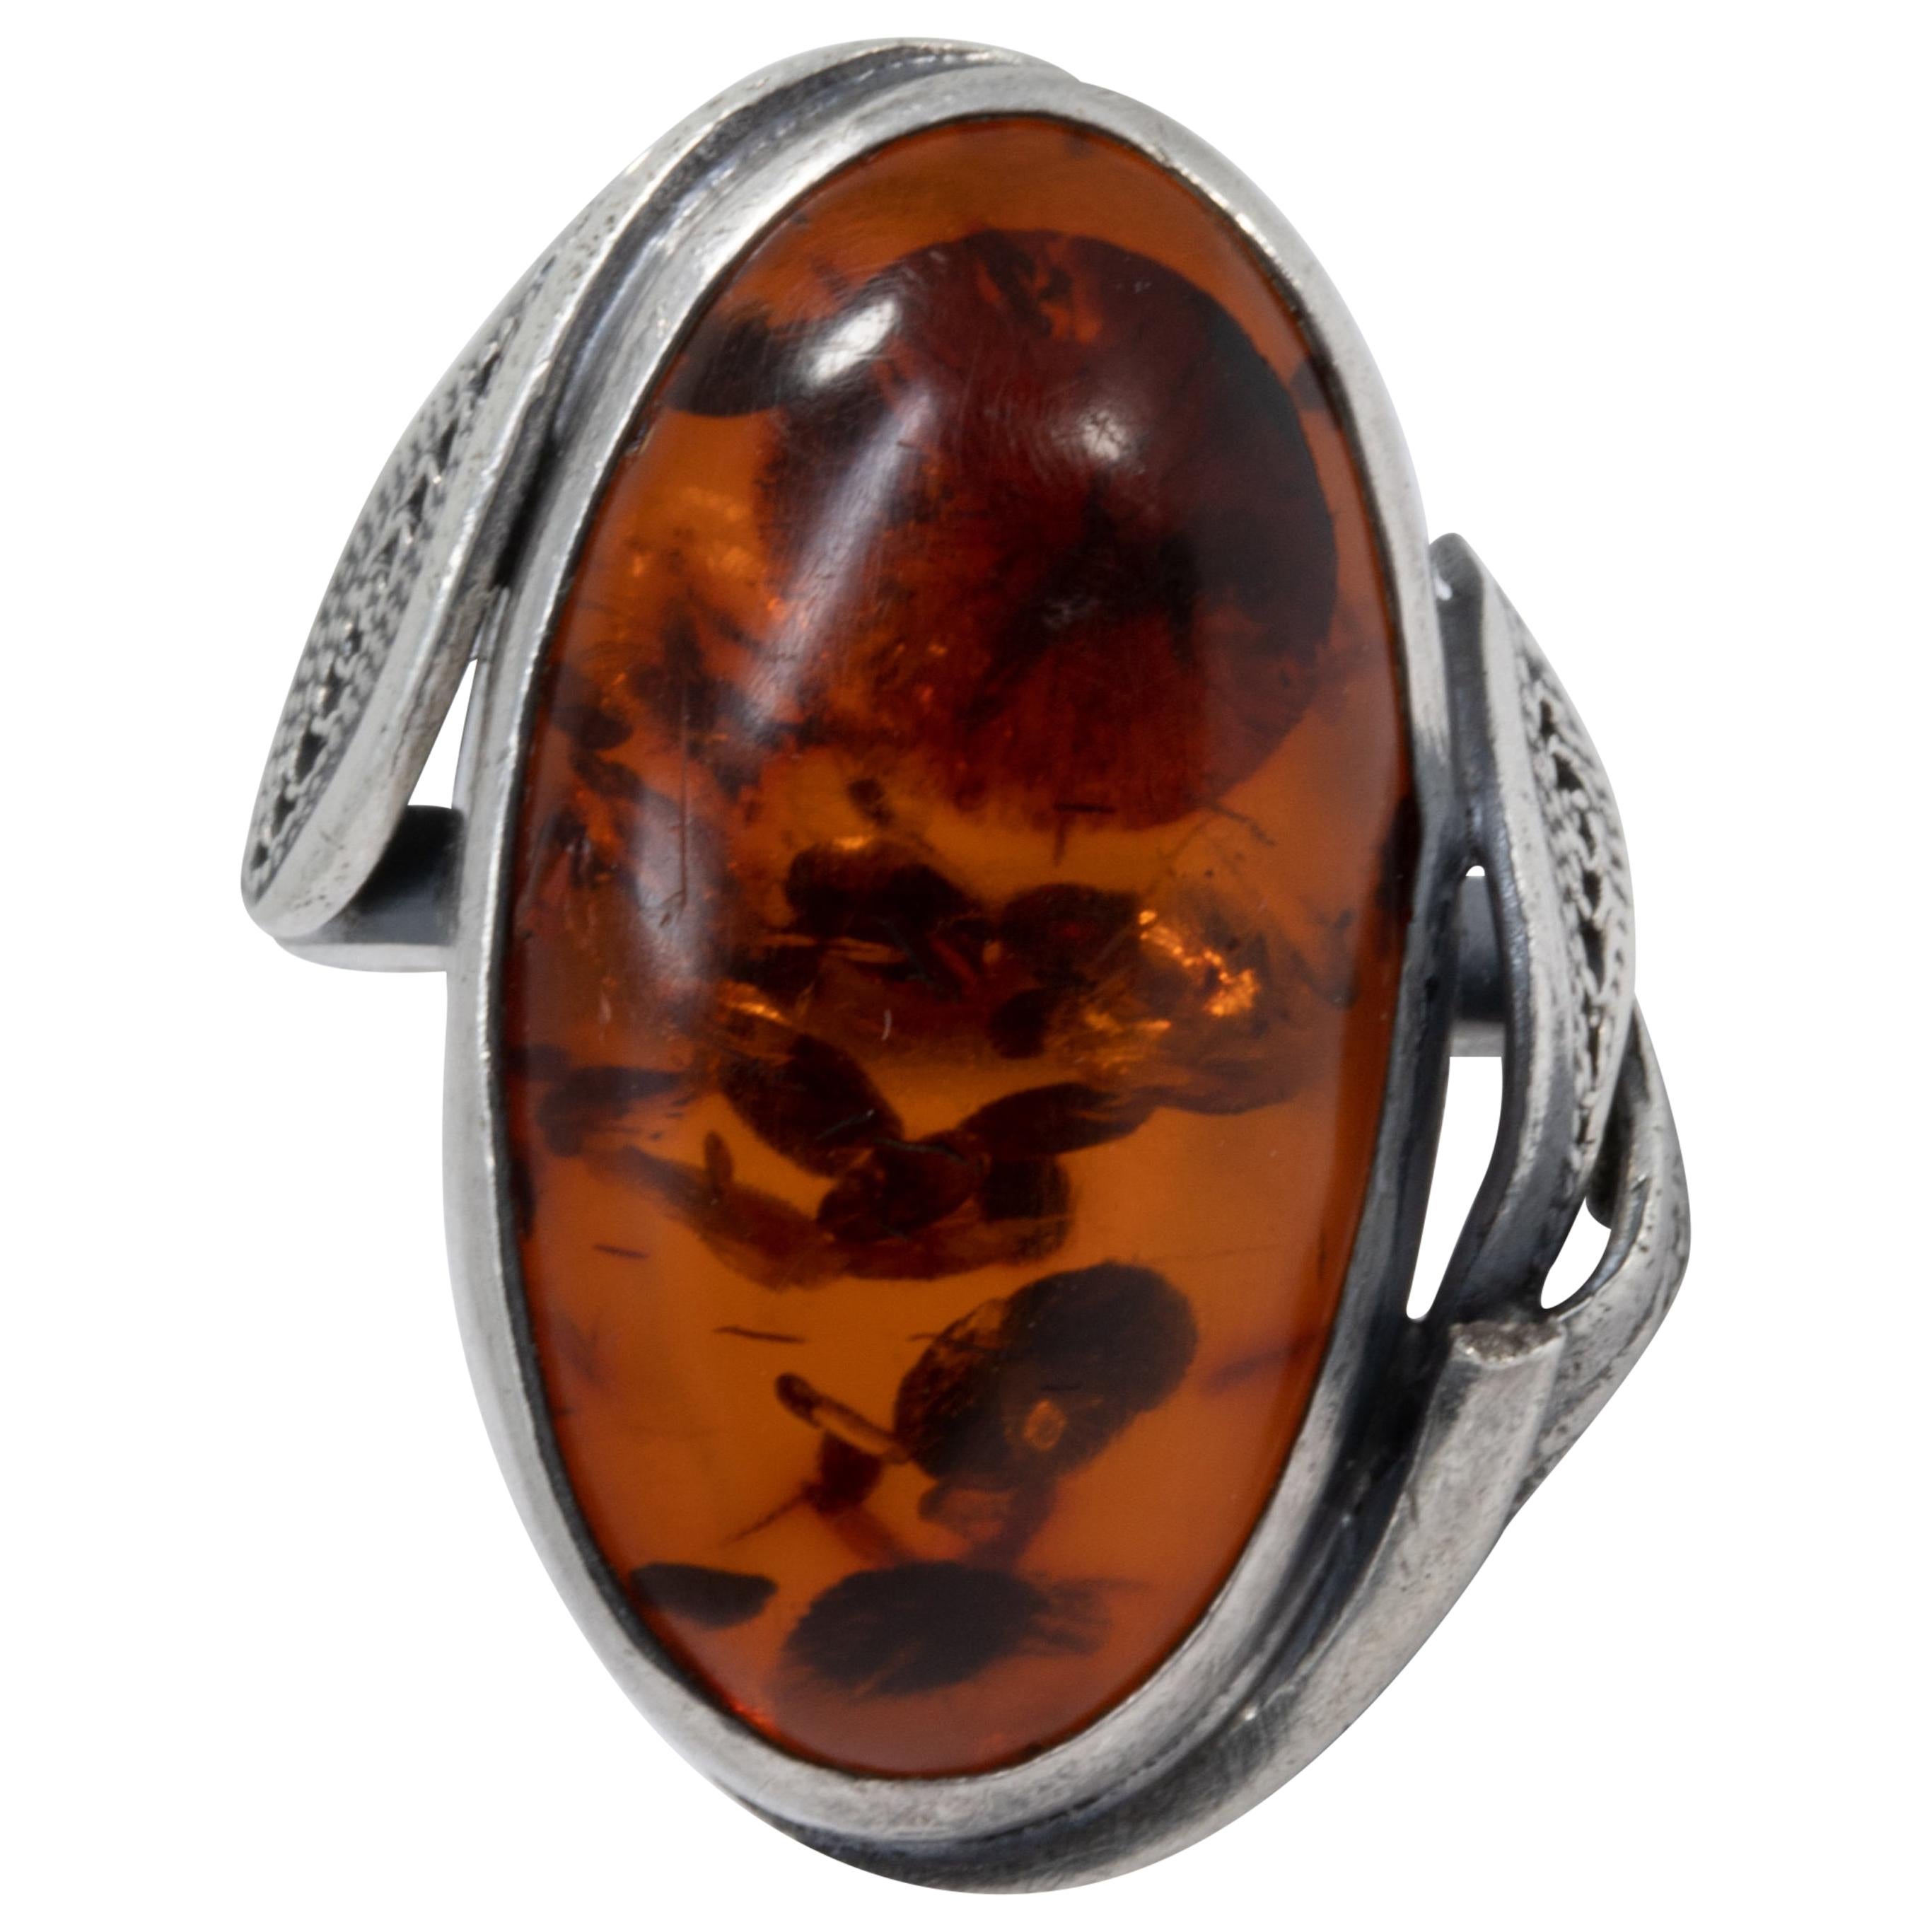 Vintage Russian Baltic Amber Cabochon Ring, Floral Silver Bezel, Open Back, Sz 7